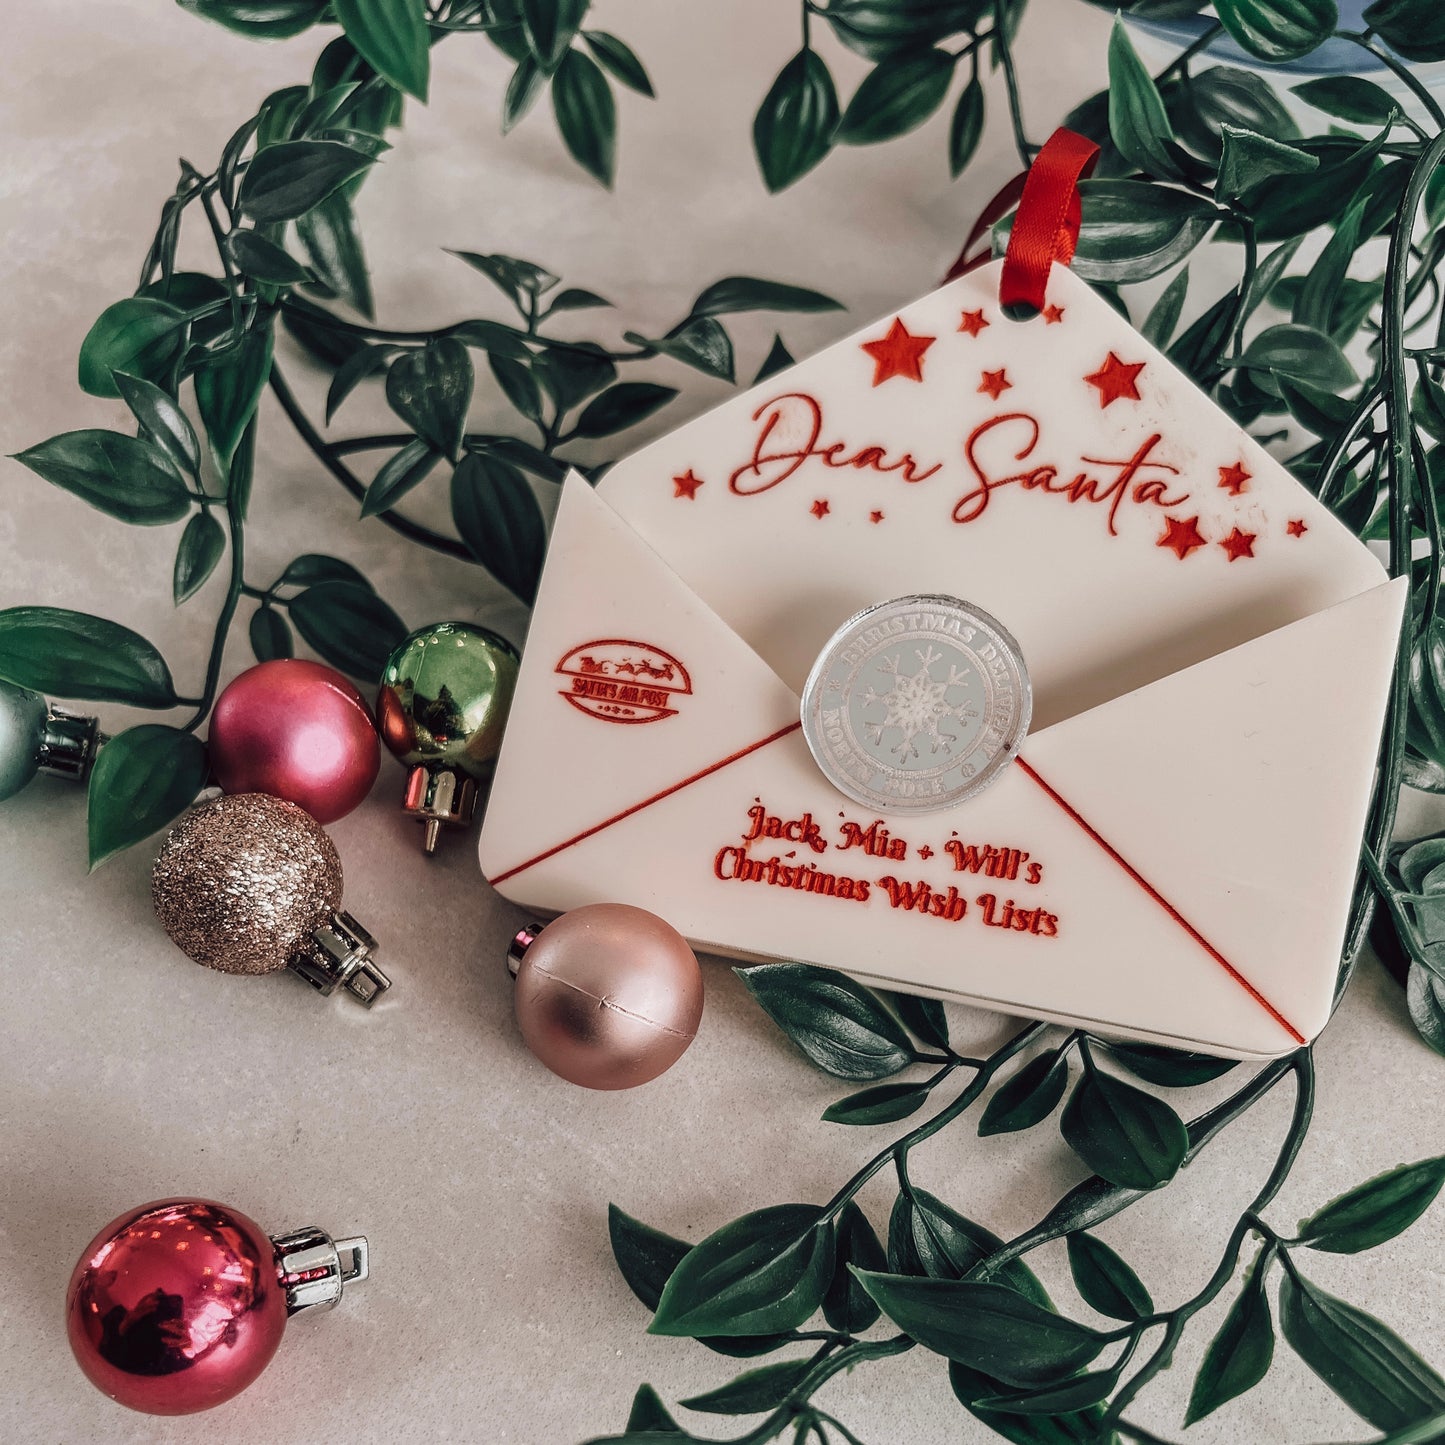 The Letter to Santa Decoration